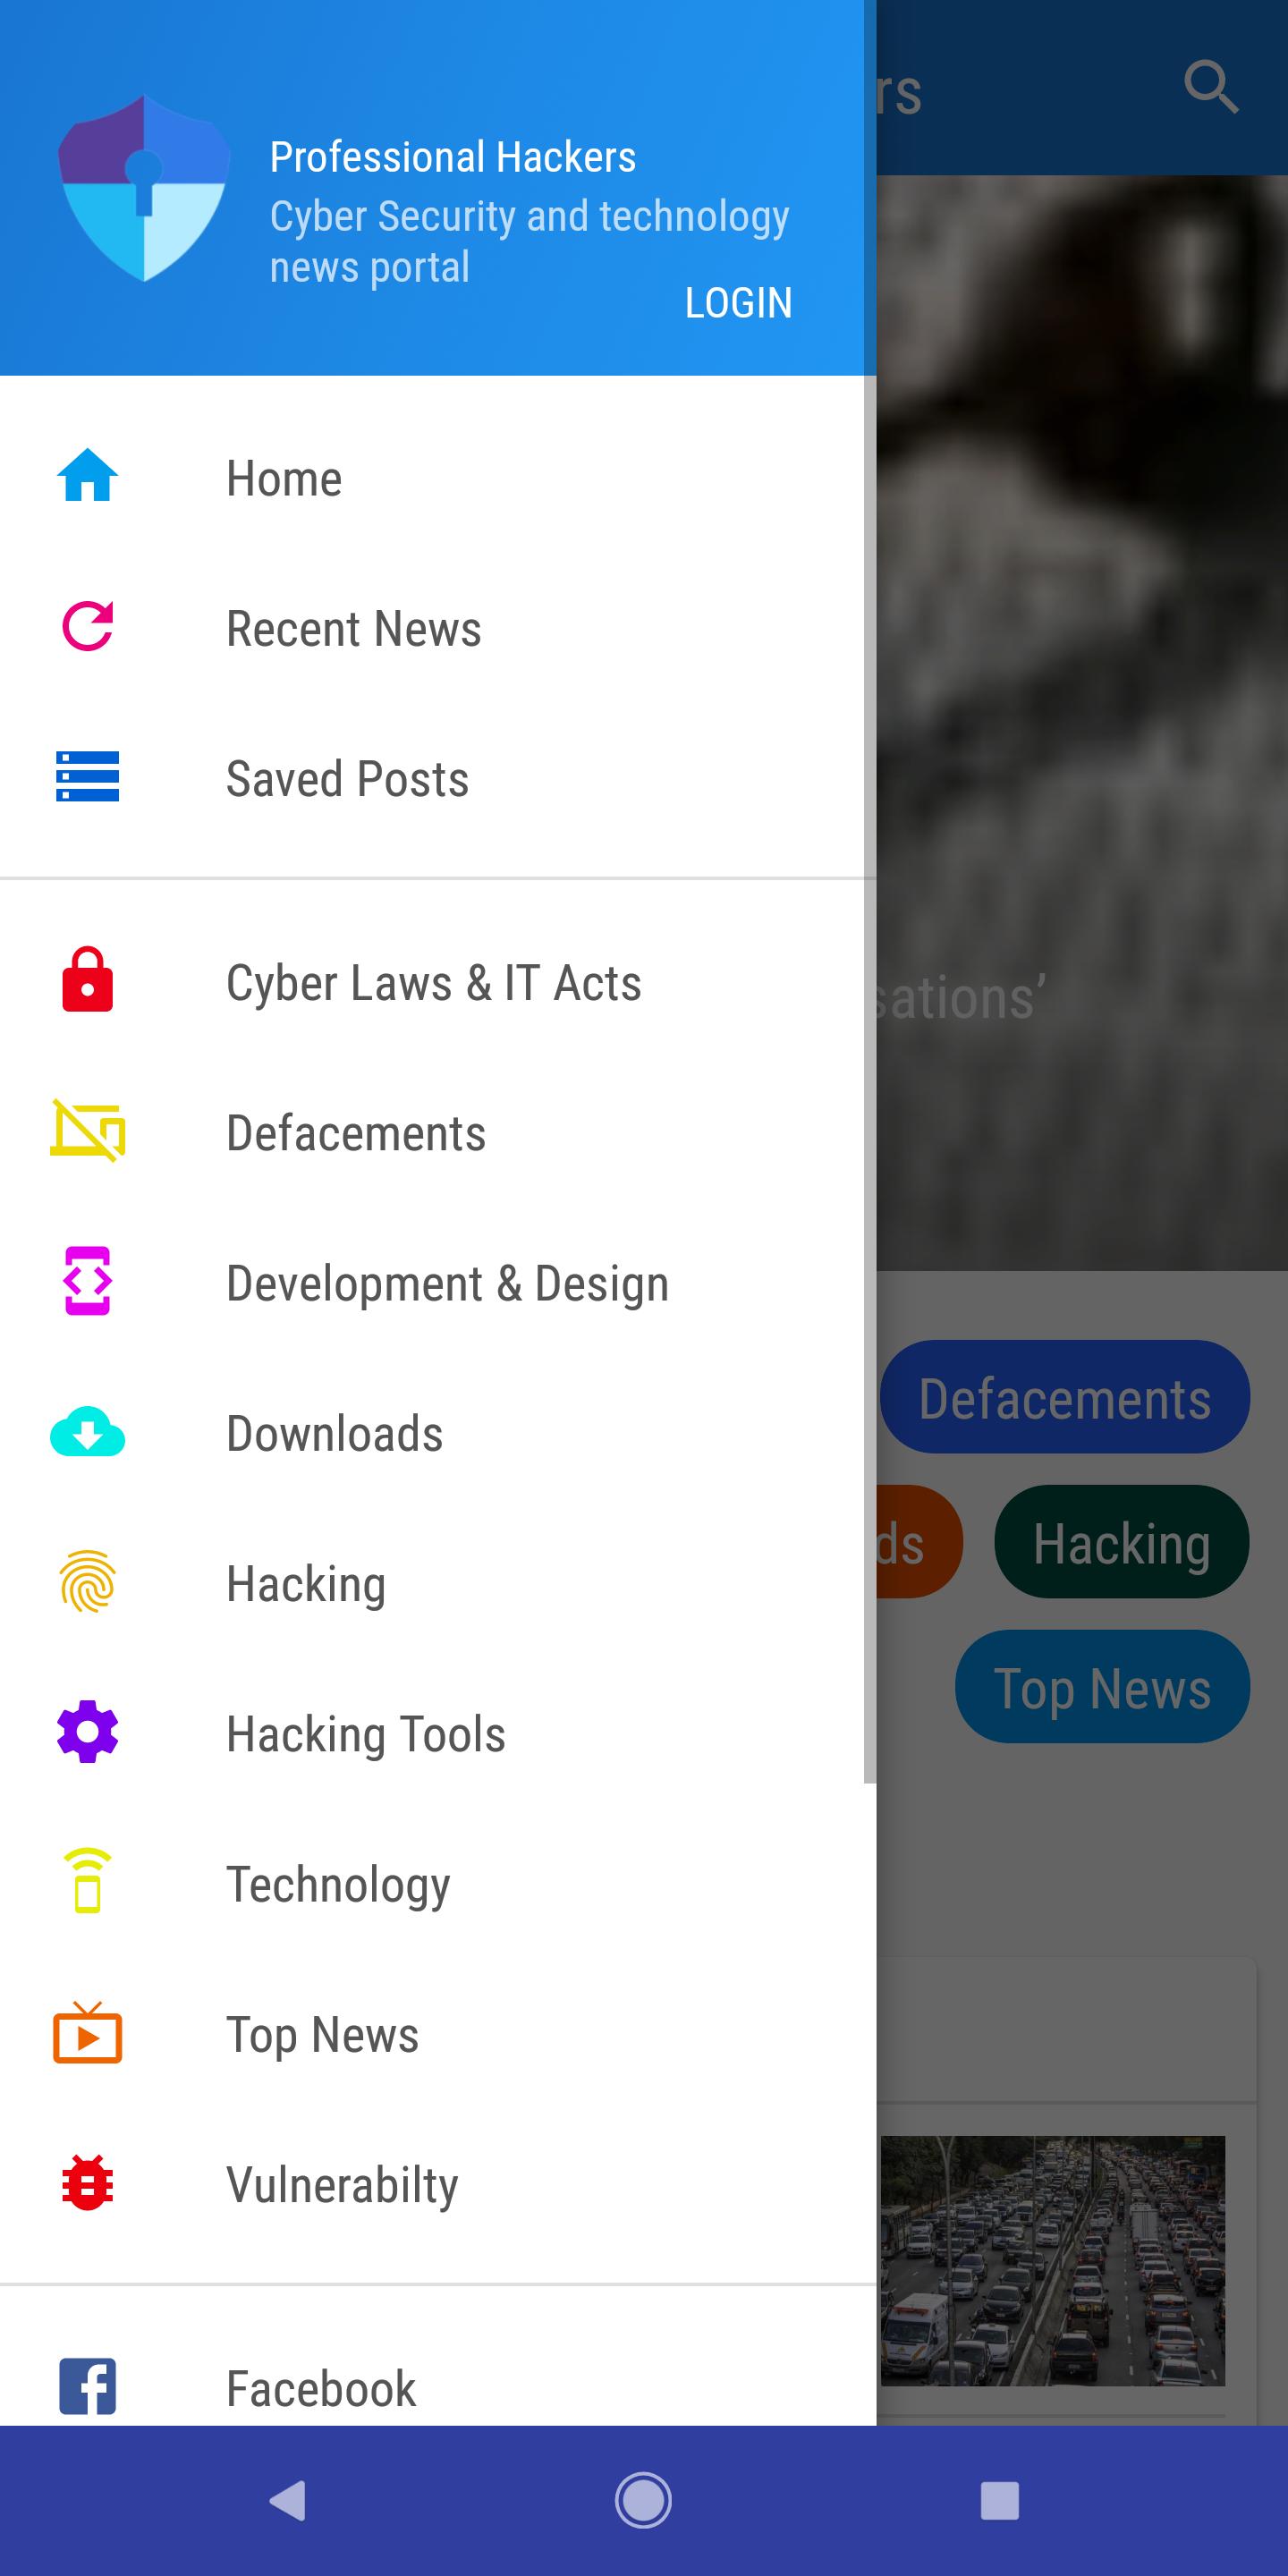 Professional Hackers for Android - APK Download - 